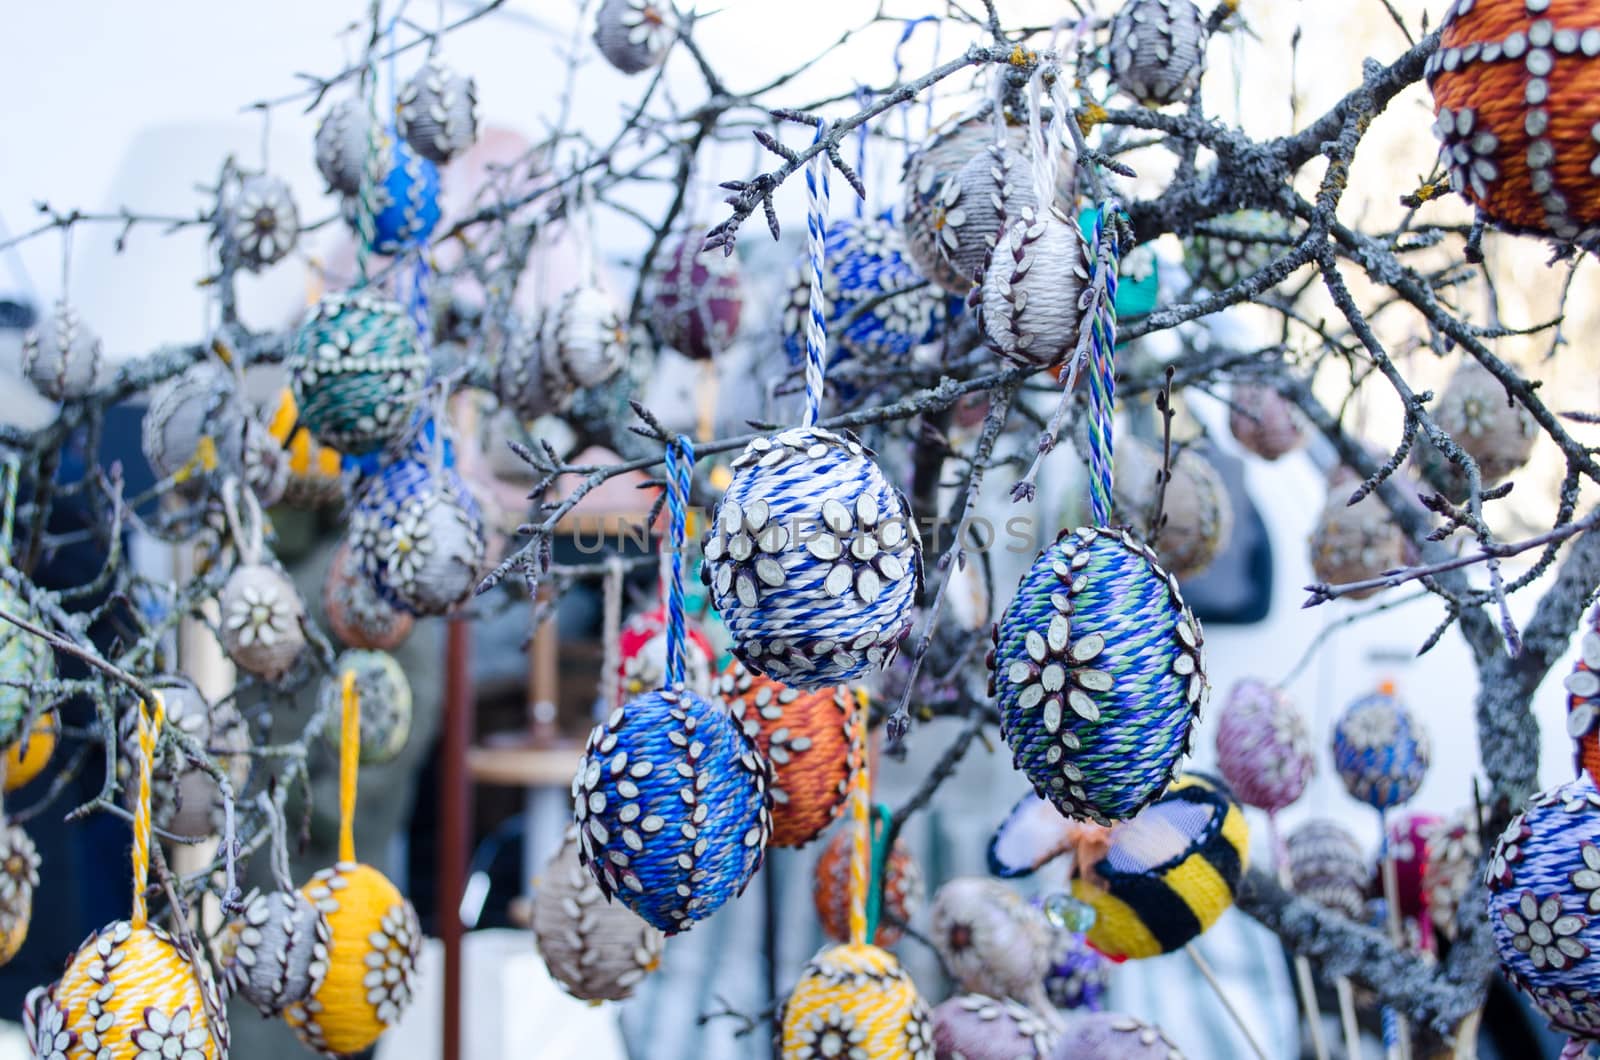 handmade easter eggs imitation decorations hang on tree branches sold in outdoor spring market fair.